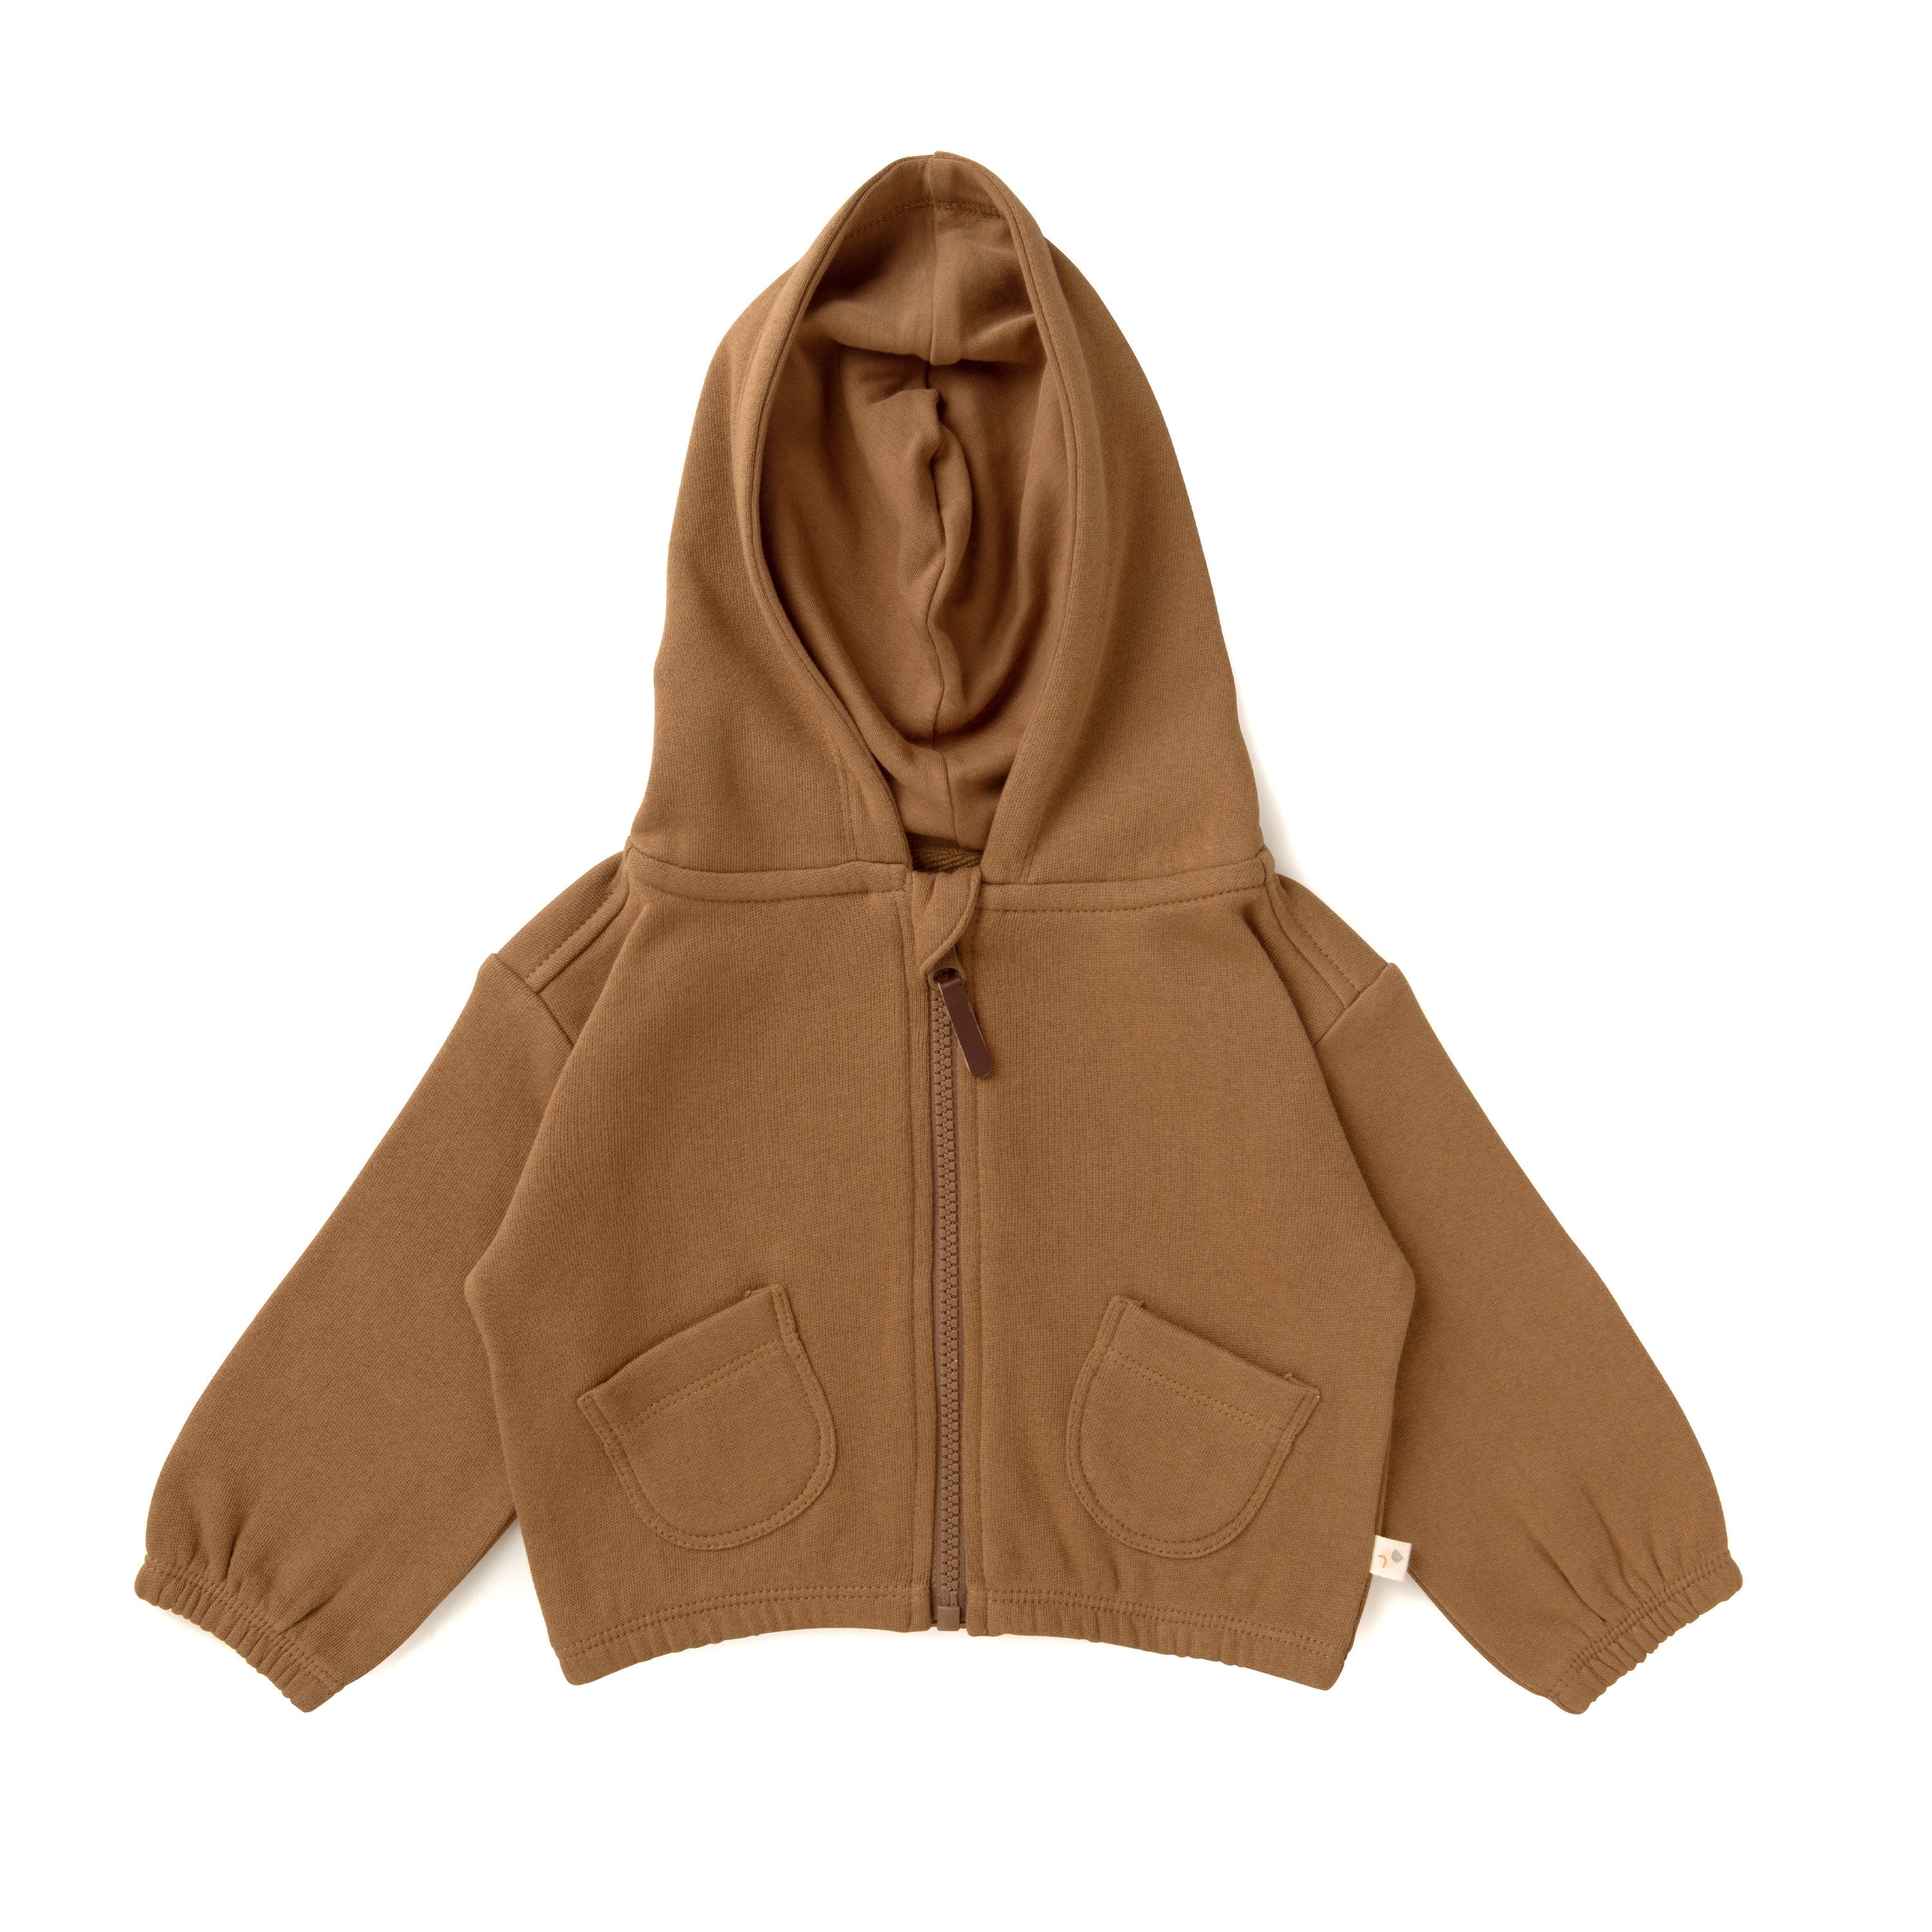 A tan Organic Hooded Jacket from Organic Baby with a hood, ribbed cuffs, and two front pockets, displayed on a plain white background.